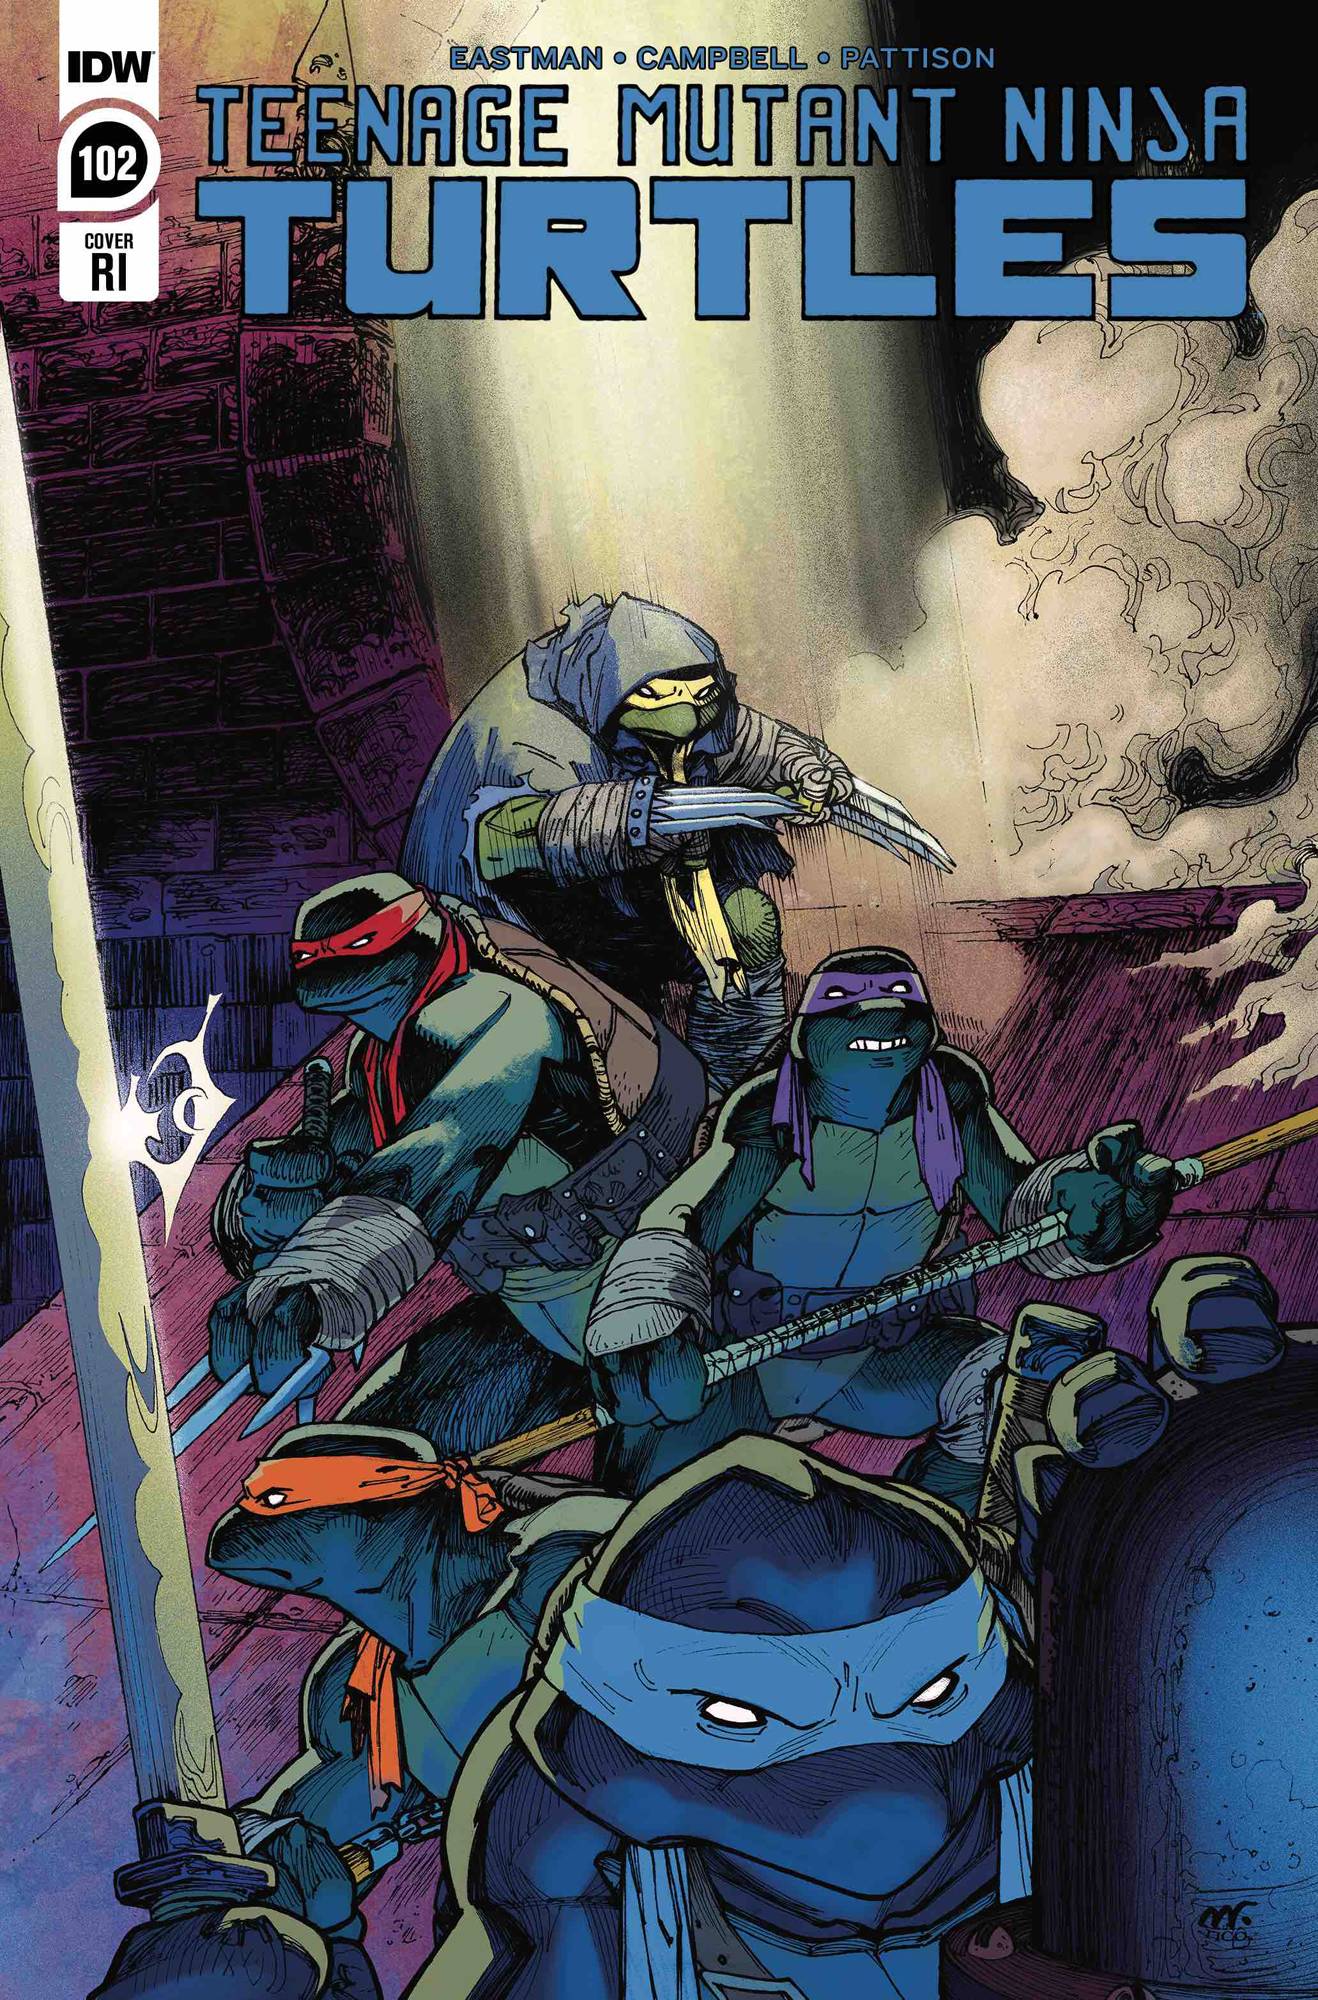 TMNT ONGOING #102 1:10 VARIANT 01/29/20 FOC 01/06/20